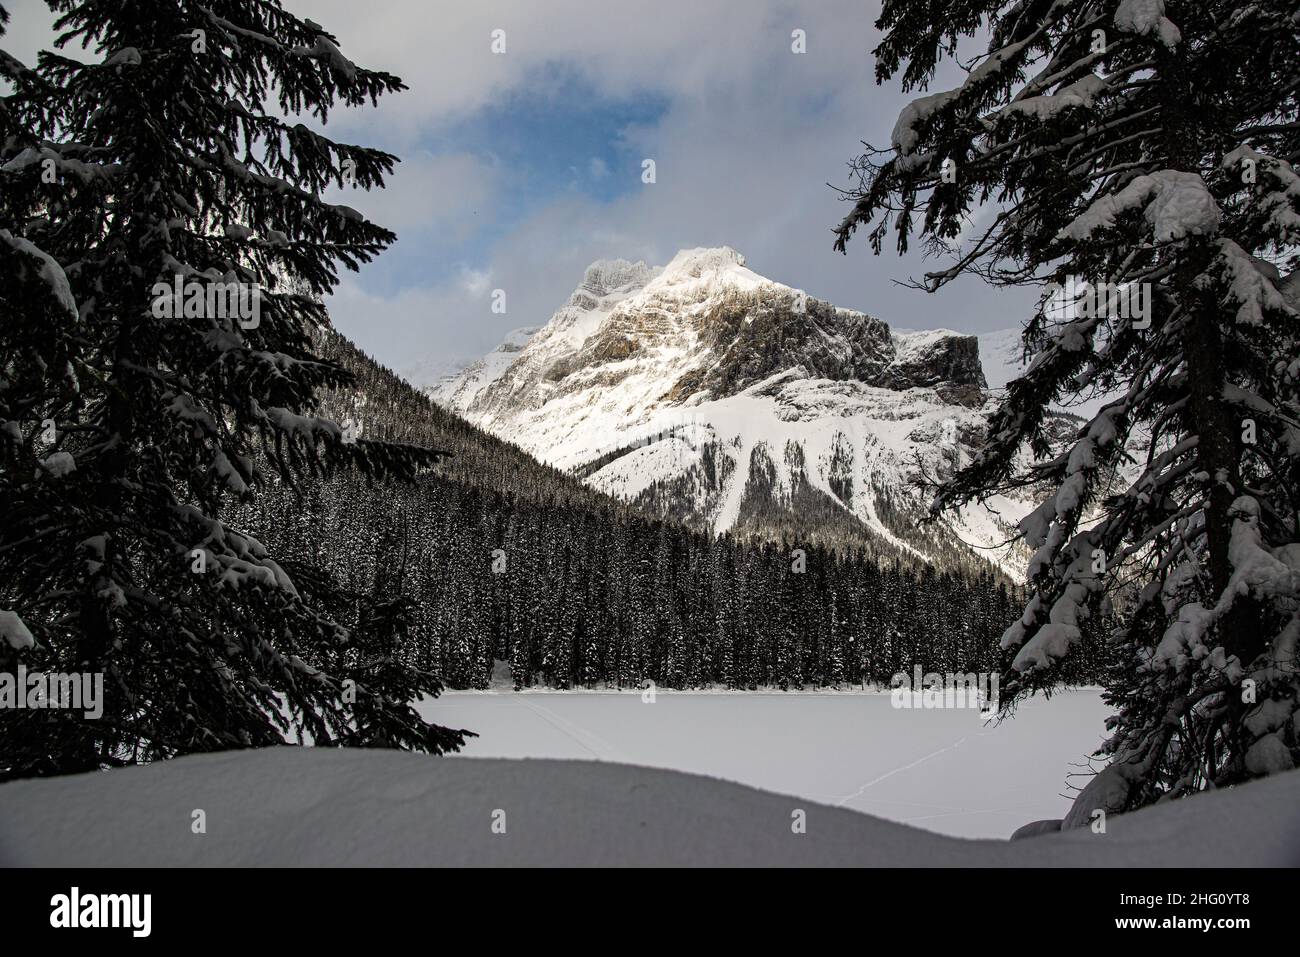 Yoho National Park, Canada - Dec. 23 2021: Frozen Emerald Lake hiding in winter forest surounded by rockies mountains in Yoho National Park Stock Photo